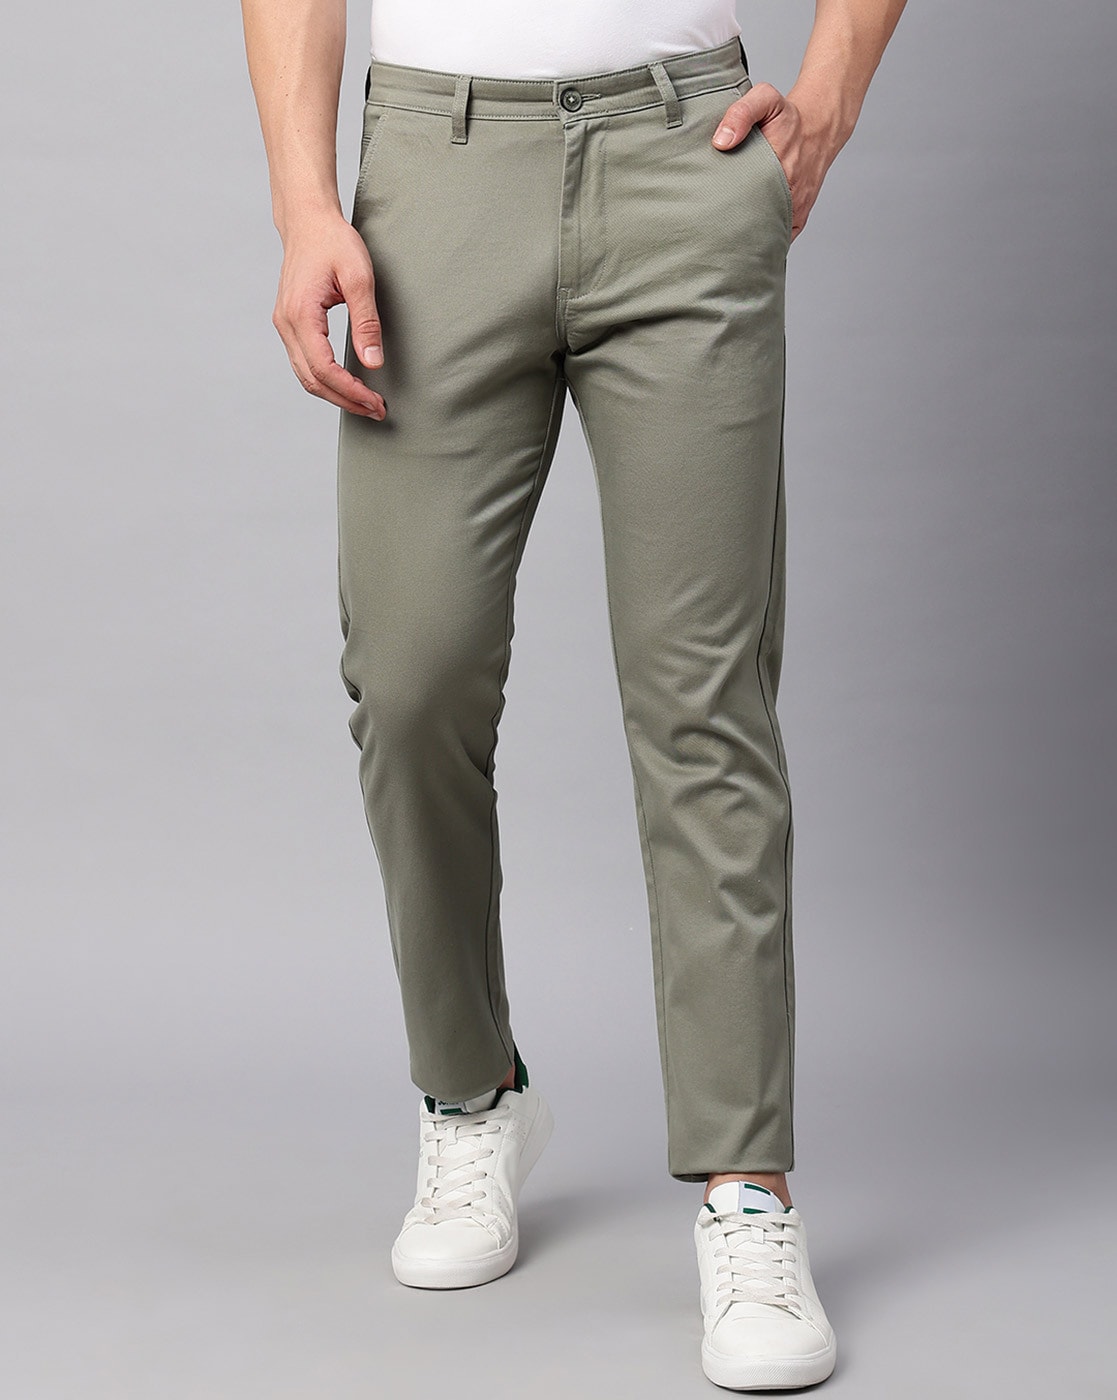 Buy Trousers for Men Online |Blue Buddha | Buy Now